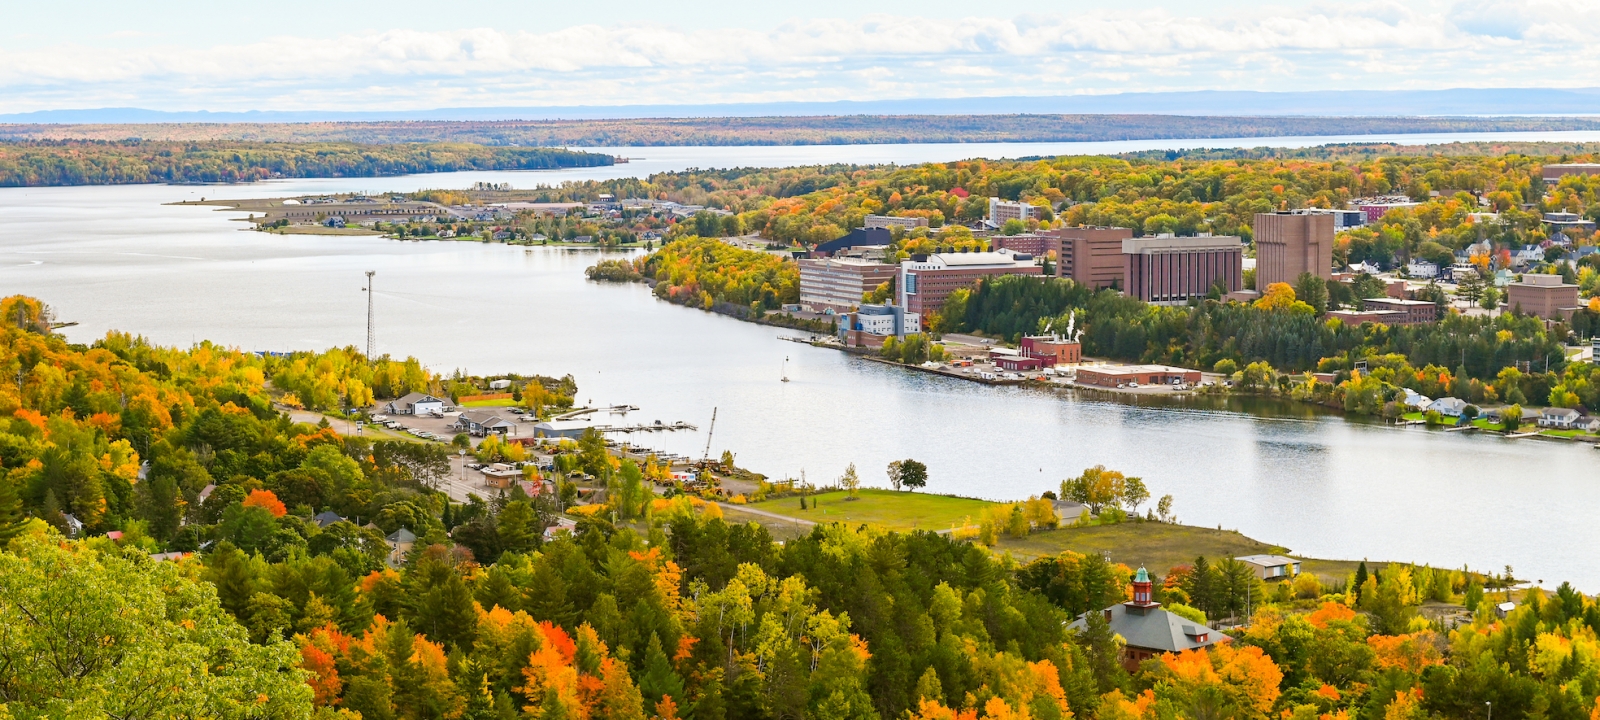 View of Michigan Tech campus and Portage Canal from Mont Ripley in autumn.